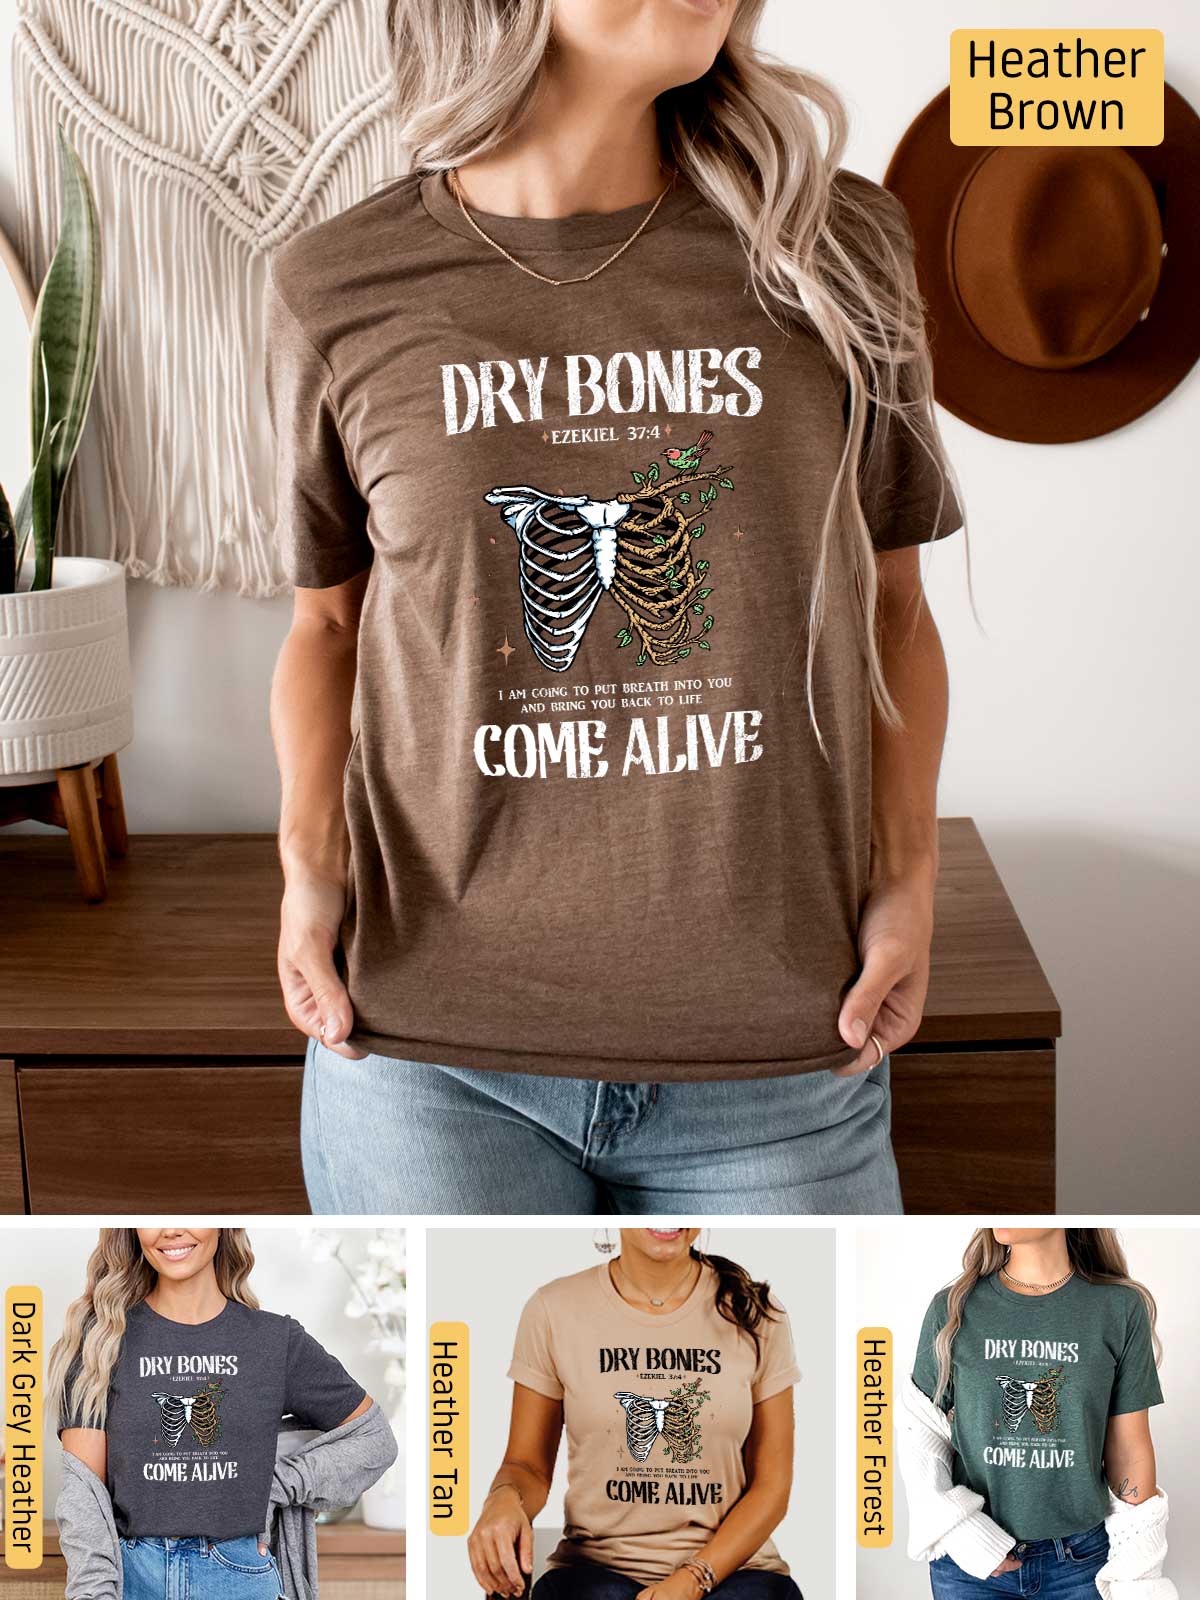 a woman wearing a t - shirt that says dry bones come alive